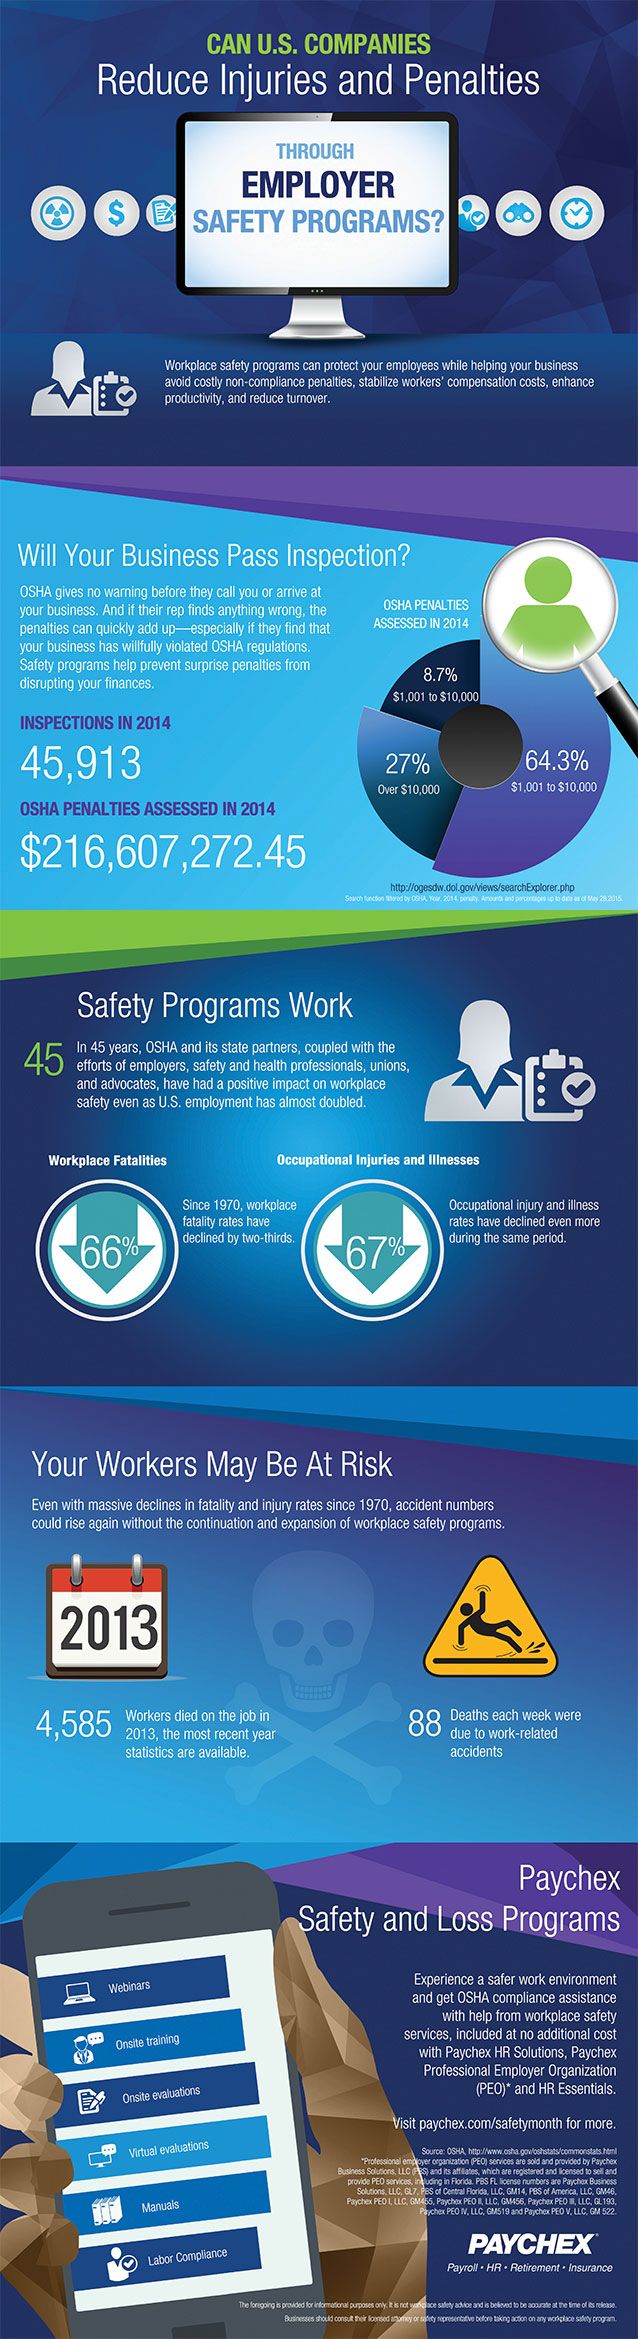 an infographic on workplace safety and how companies can reduce injuries and penalties through employer safety programs.